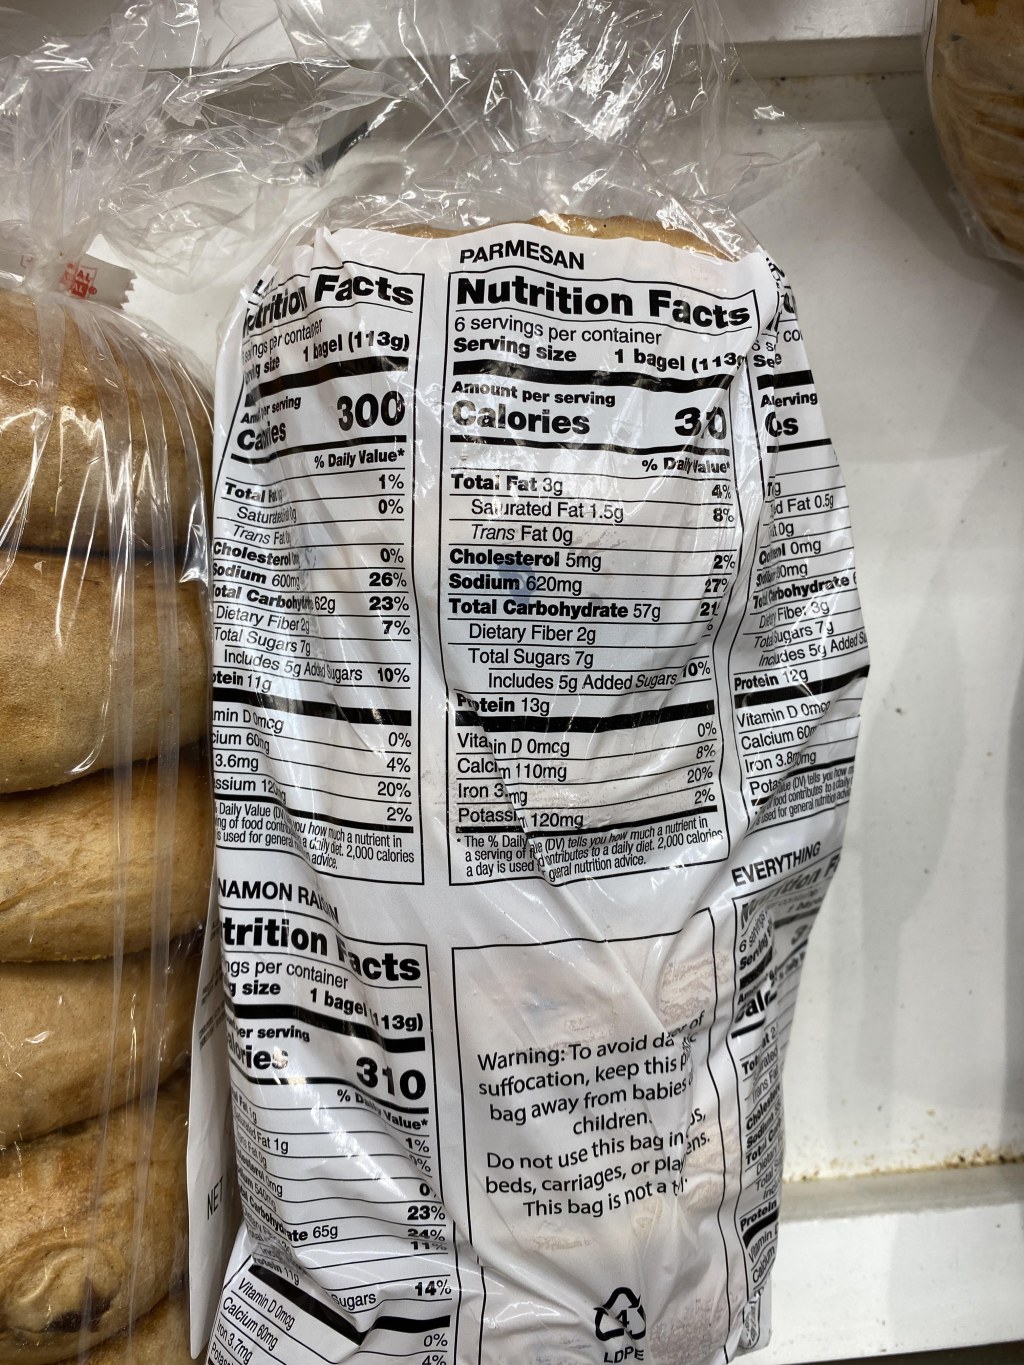 Picture of: Has Anyone Ever Seen the Mythical Parmesan Bagels? : r/Costco